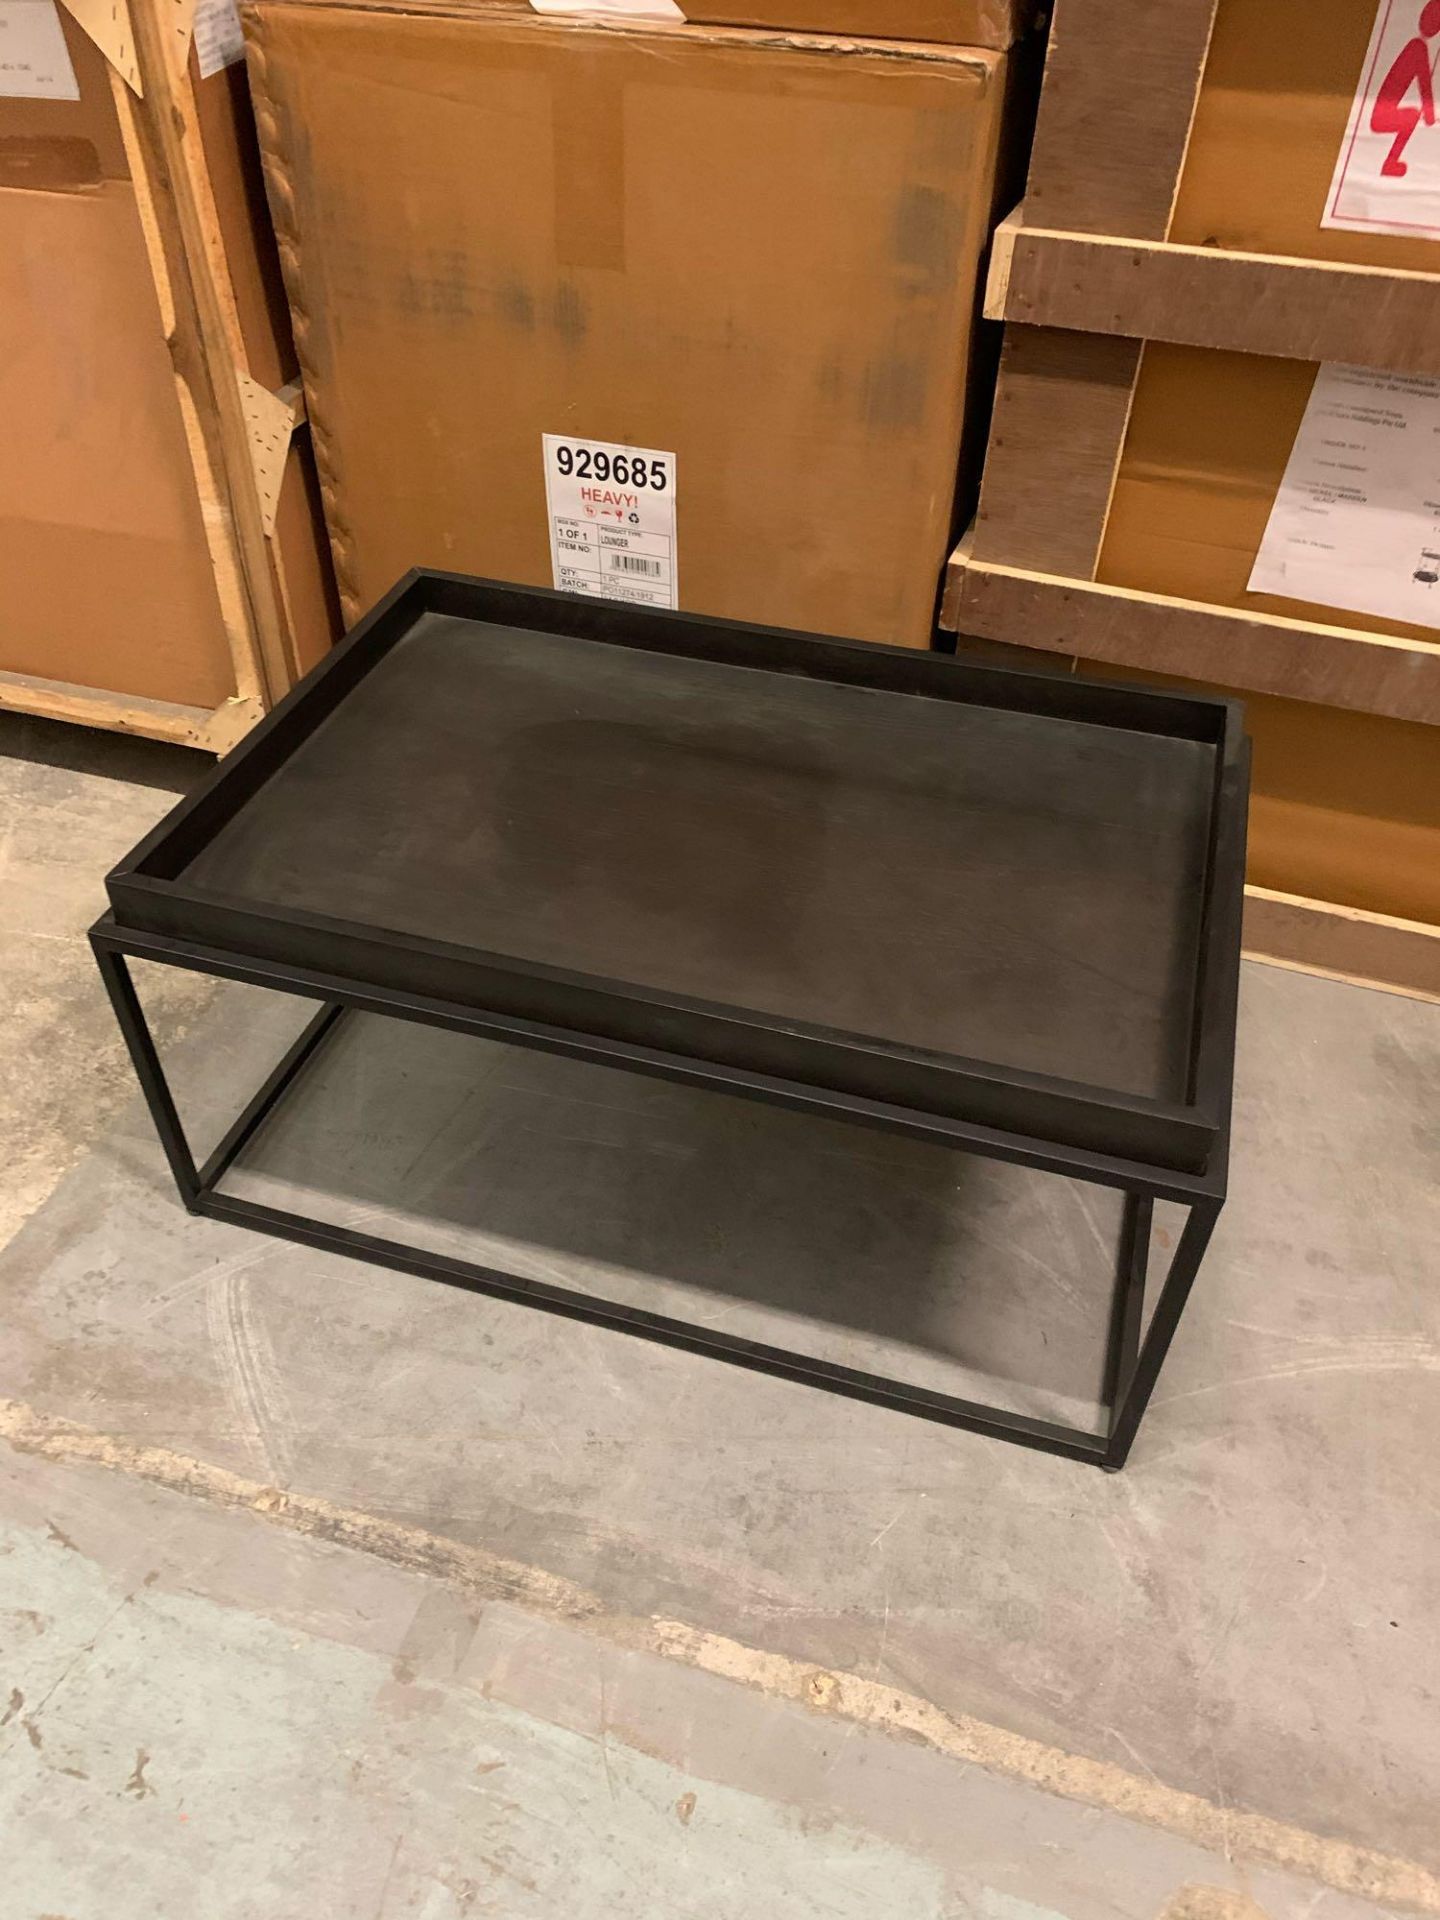 Forden Tray Coffee Table Black The Forden Black Side Table Completed With A Practical Tray Top Table - Bild 2 aus 8